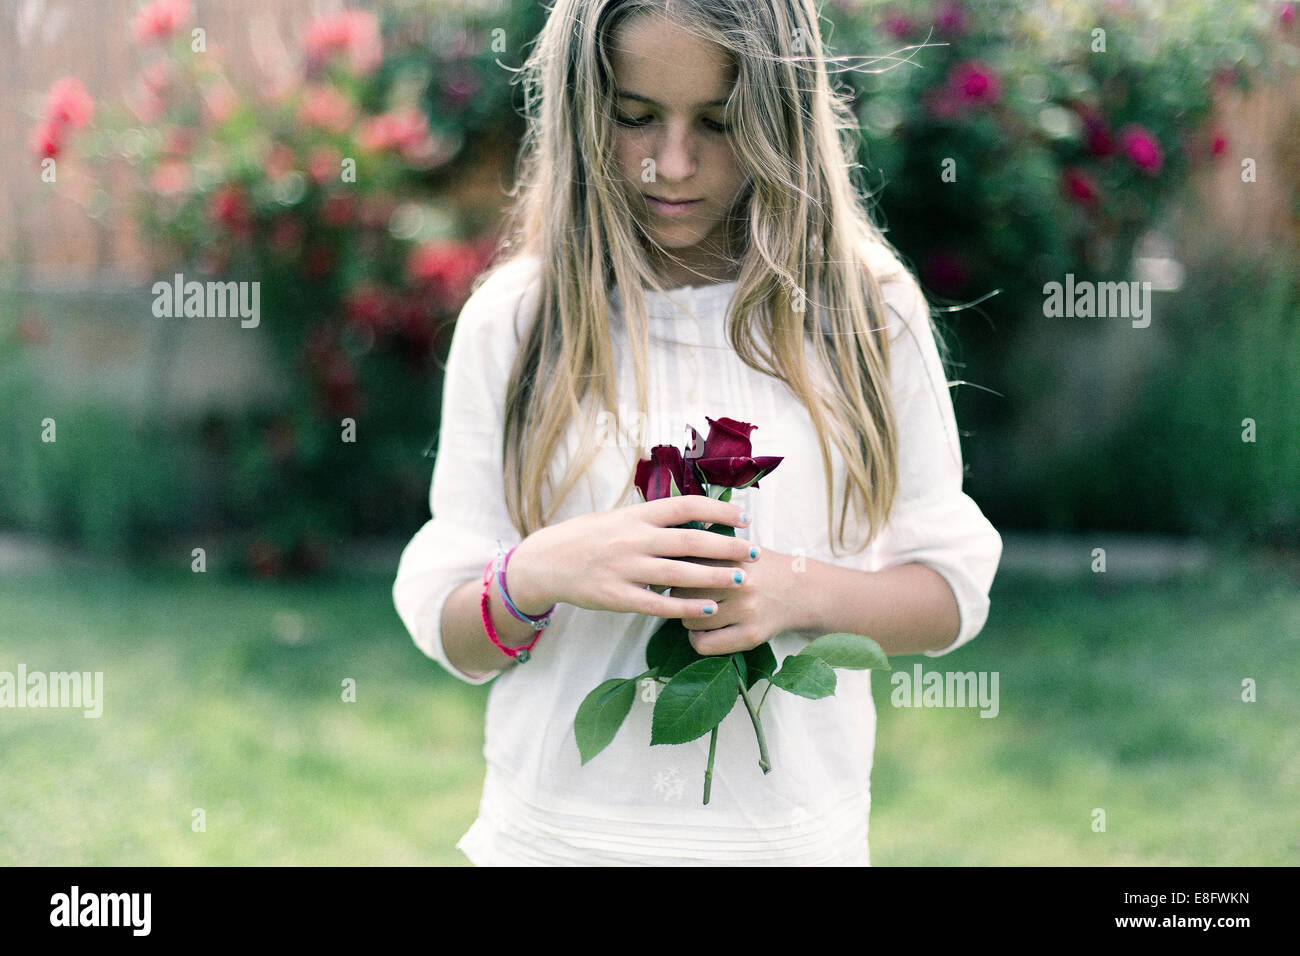 View of girl holding red roses Banque D'Images